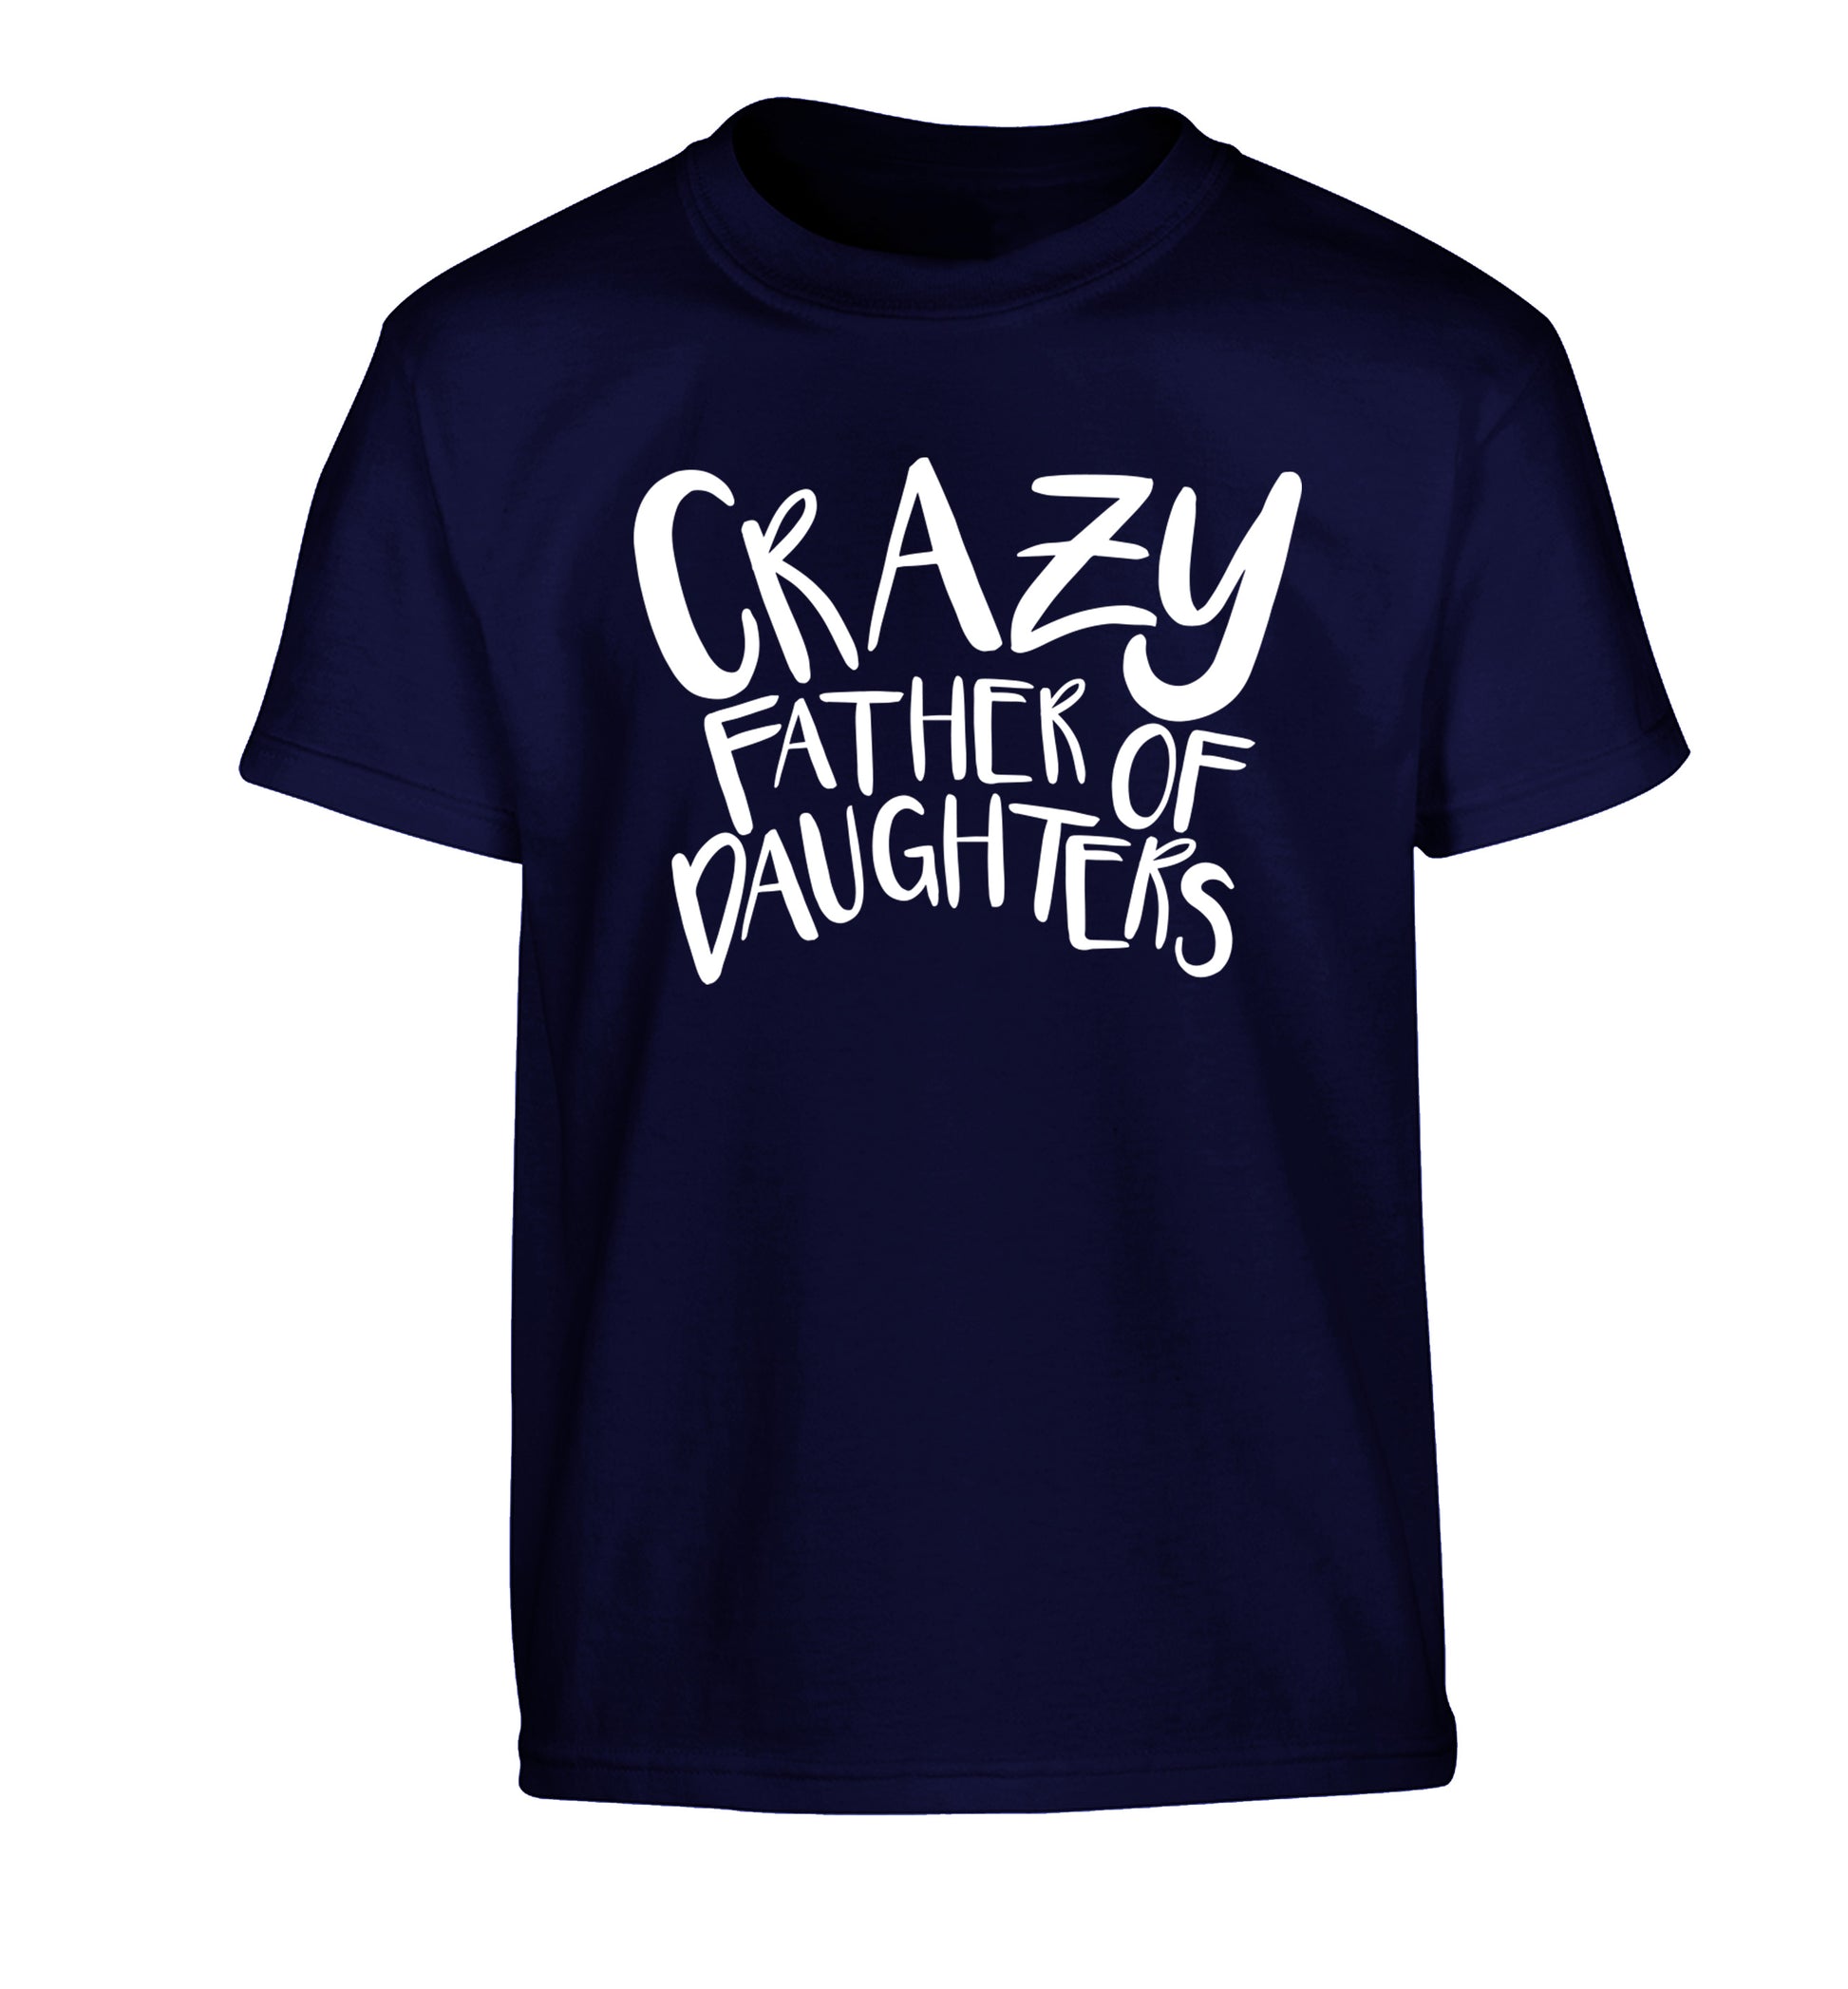 Crazy father of daughters Children's navy Tshirt 12-13 Years